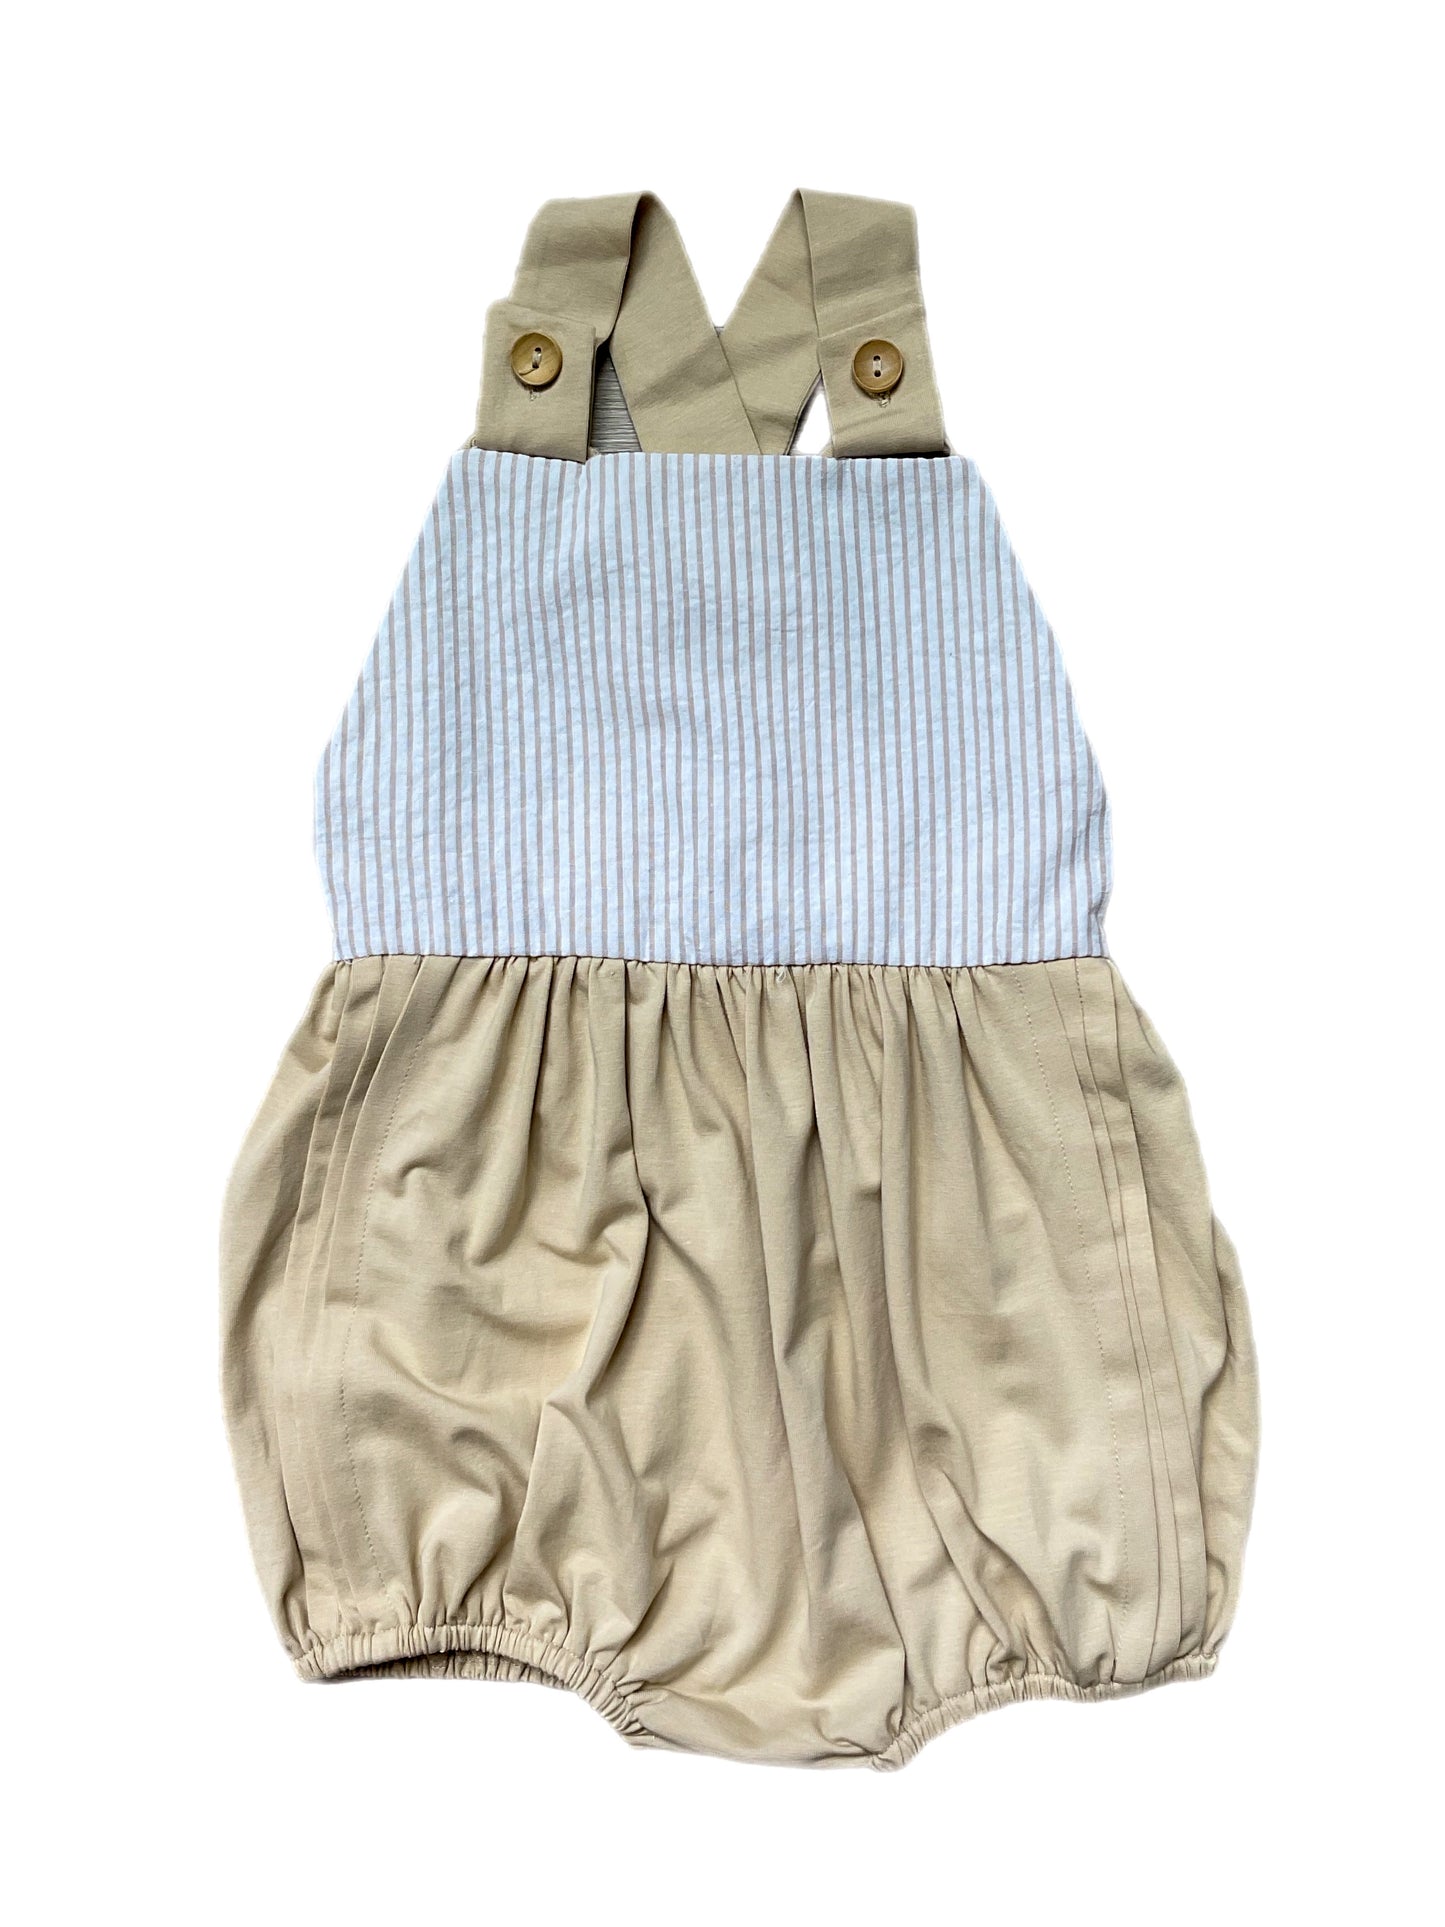 Boy’s Sunsuit (will be blank, can not personalize)